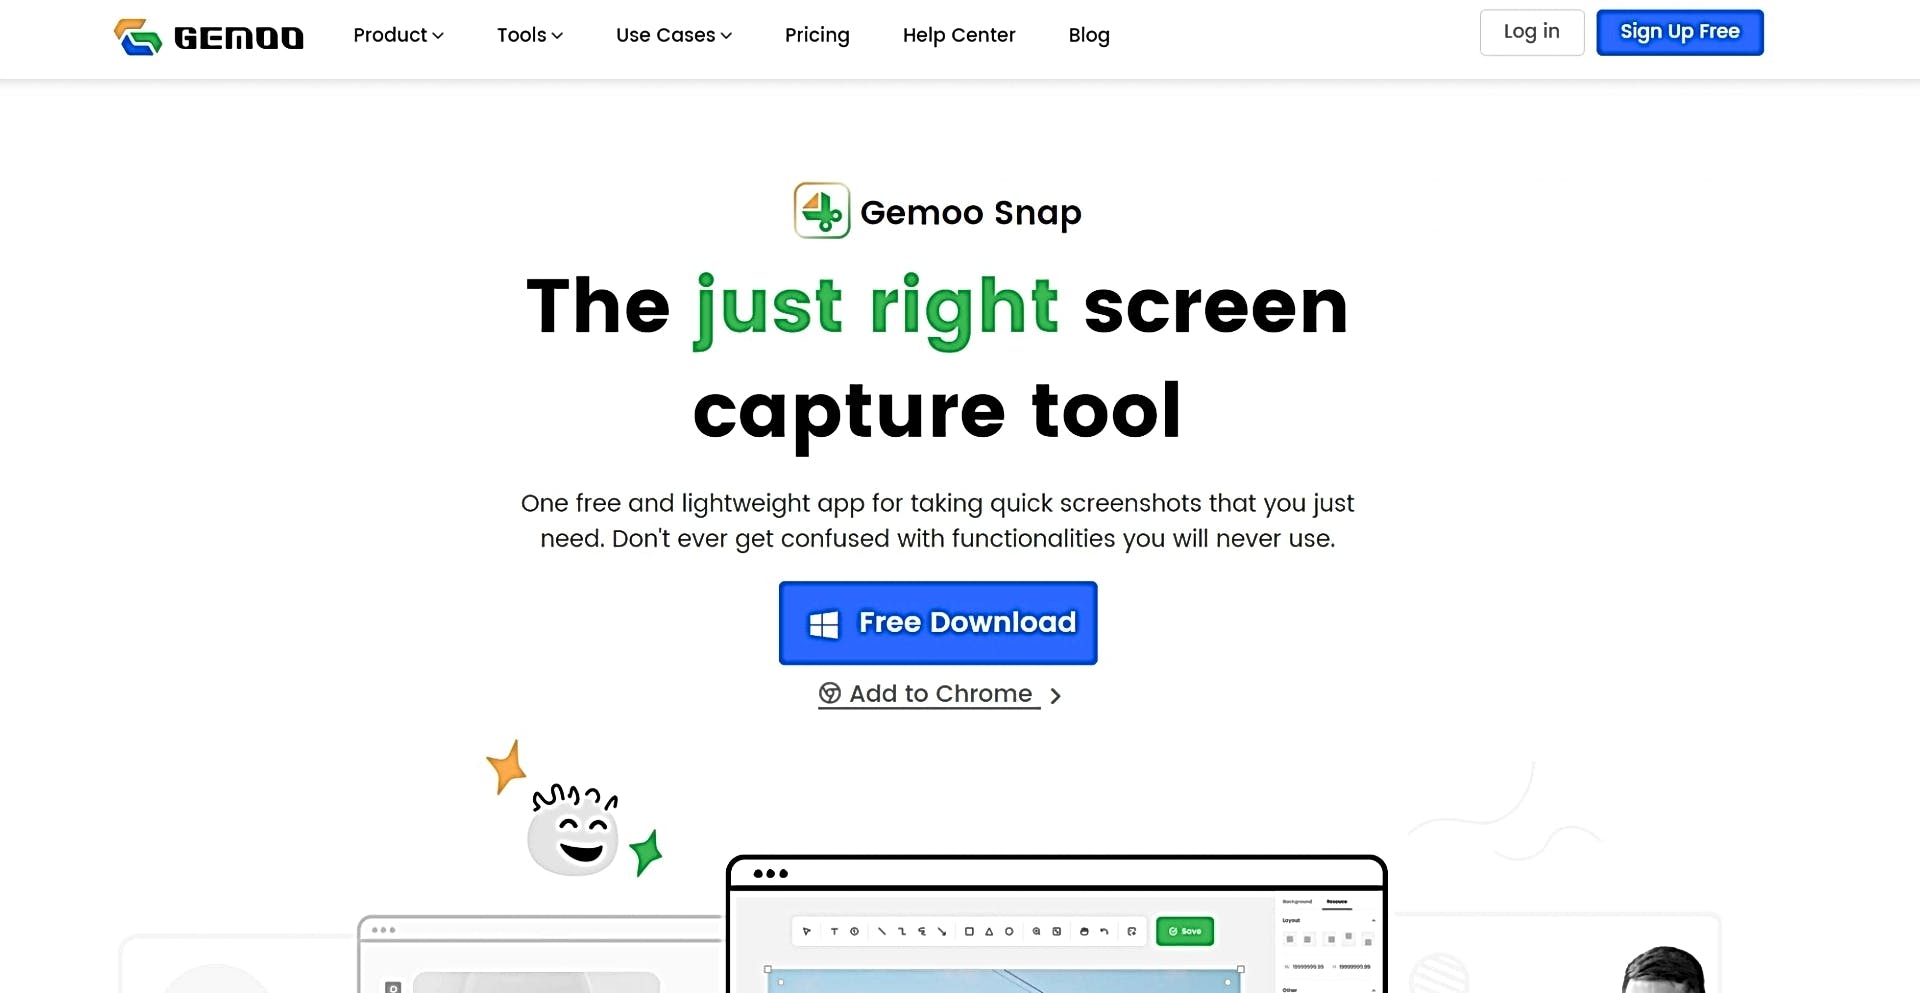 Gemoo Snap featured